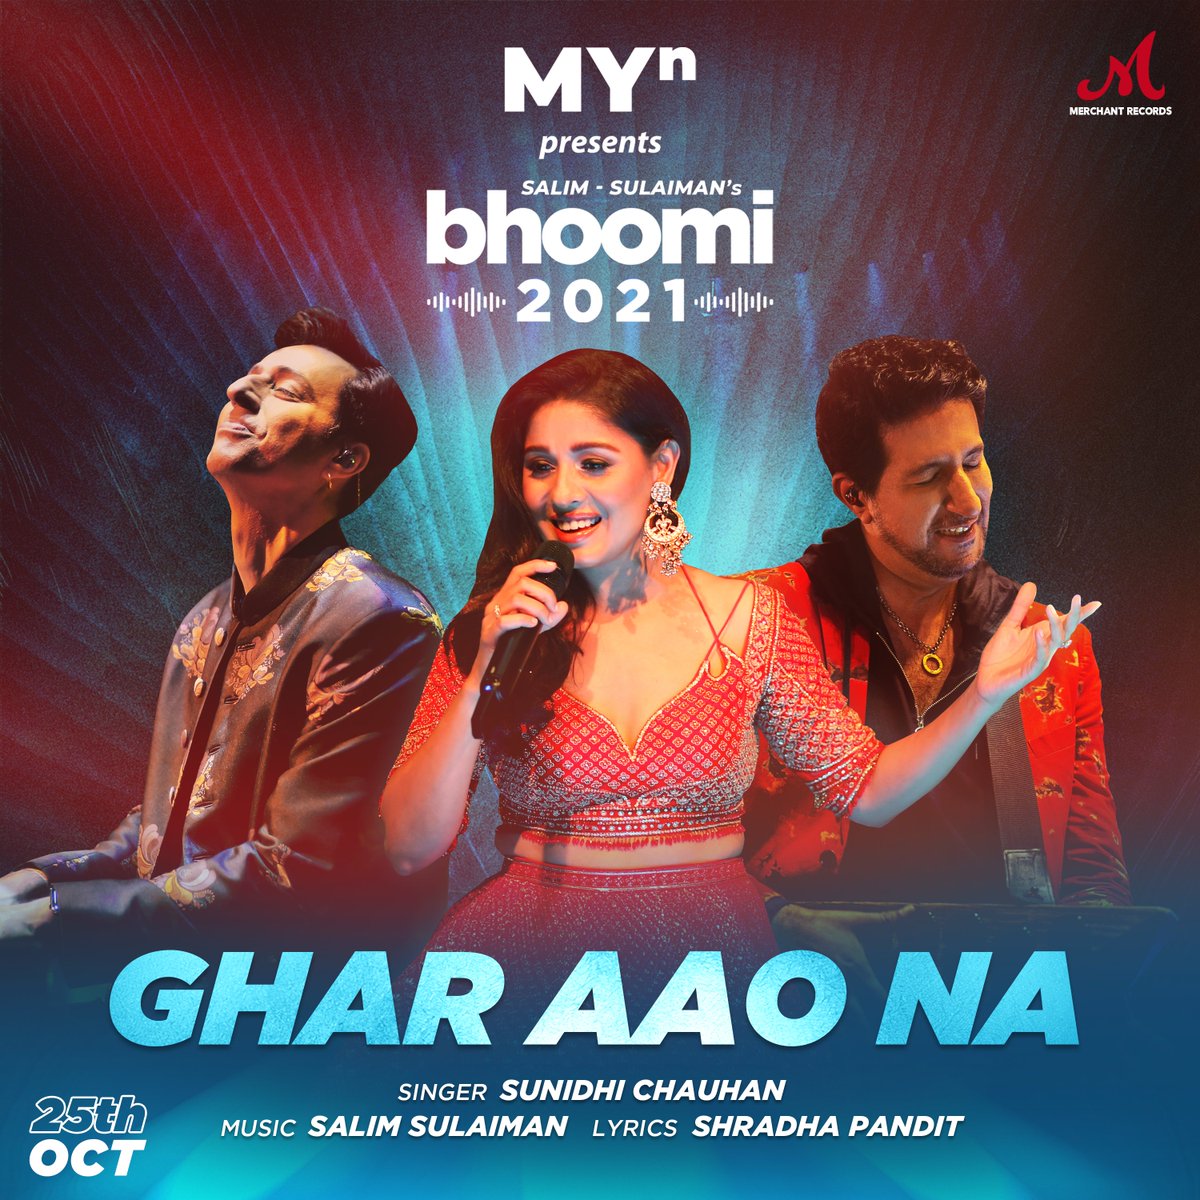 Another week, another gift from Salim Sulaiman music. 
Presenting #GharAaoNa featuring @SunidhiChauhan5
with @salim_merchant  @Sulaiman on MYn. Download the app now for exclusive BTS with Sunidhi Chauhan. #MYnPresentsBhoomi2021 
#bhoomi2021 #bhoomi #SalimSulaiman